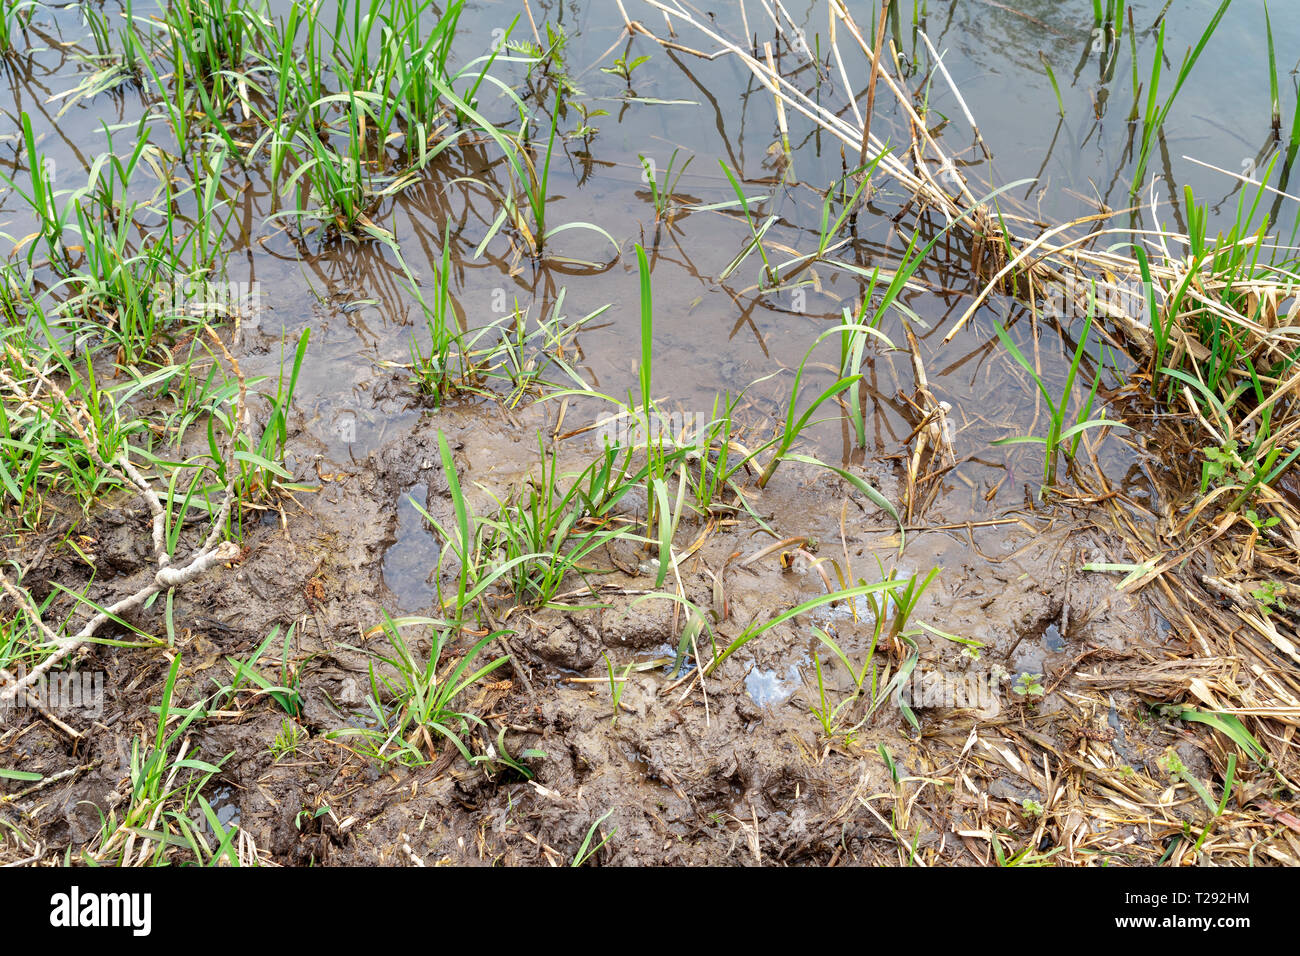 Mud and aquatic plant growth at waters edge Stock Photo